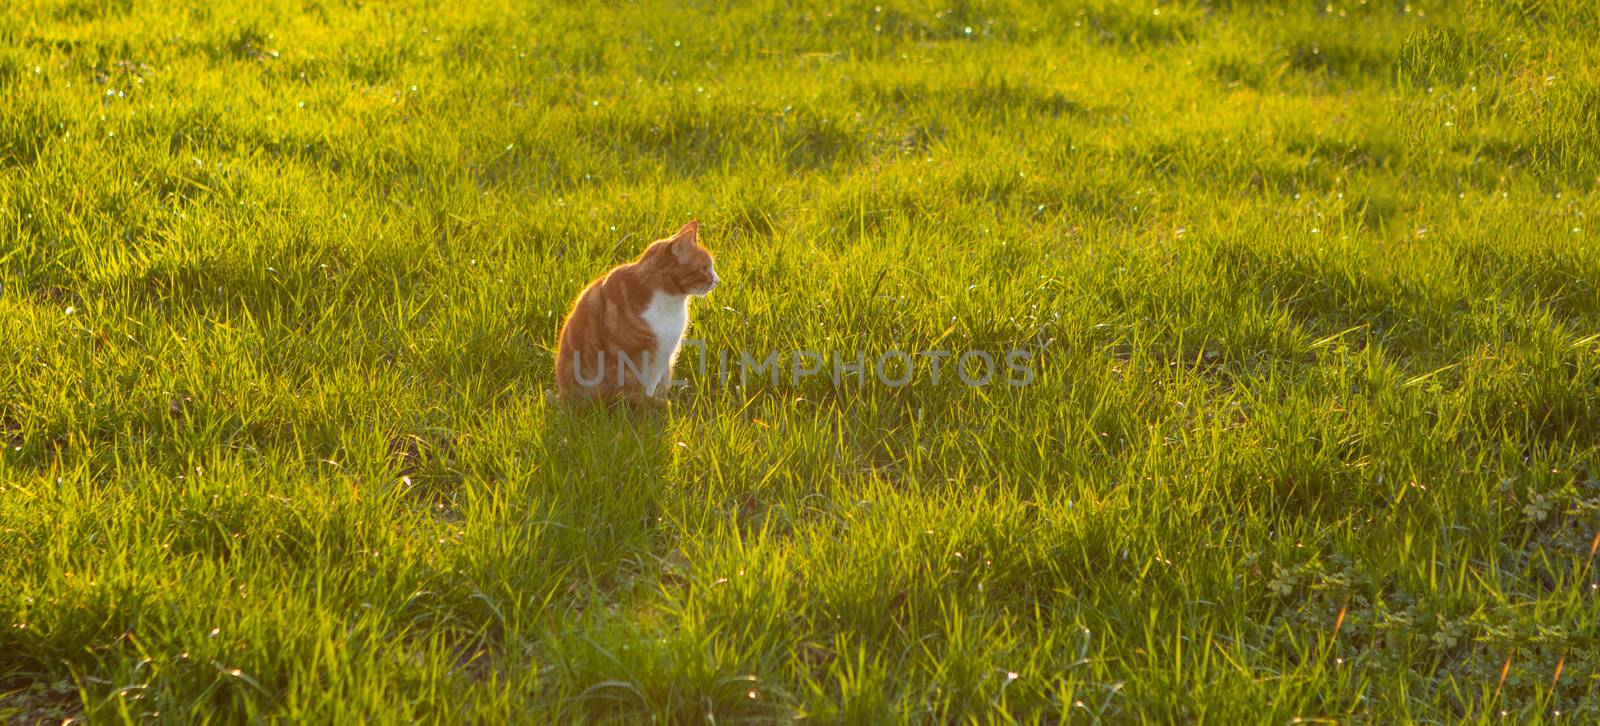 cat sitting in green grass waiting for a mouse, back lit by PeterHofstetter